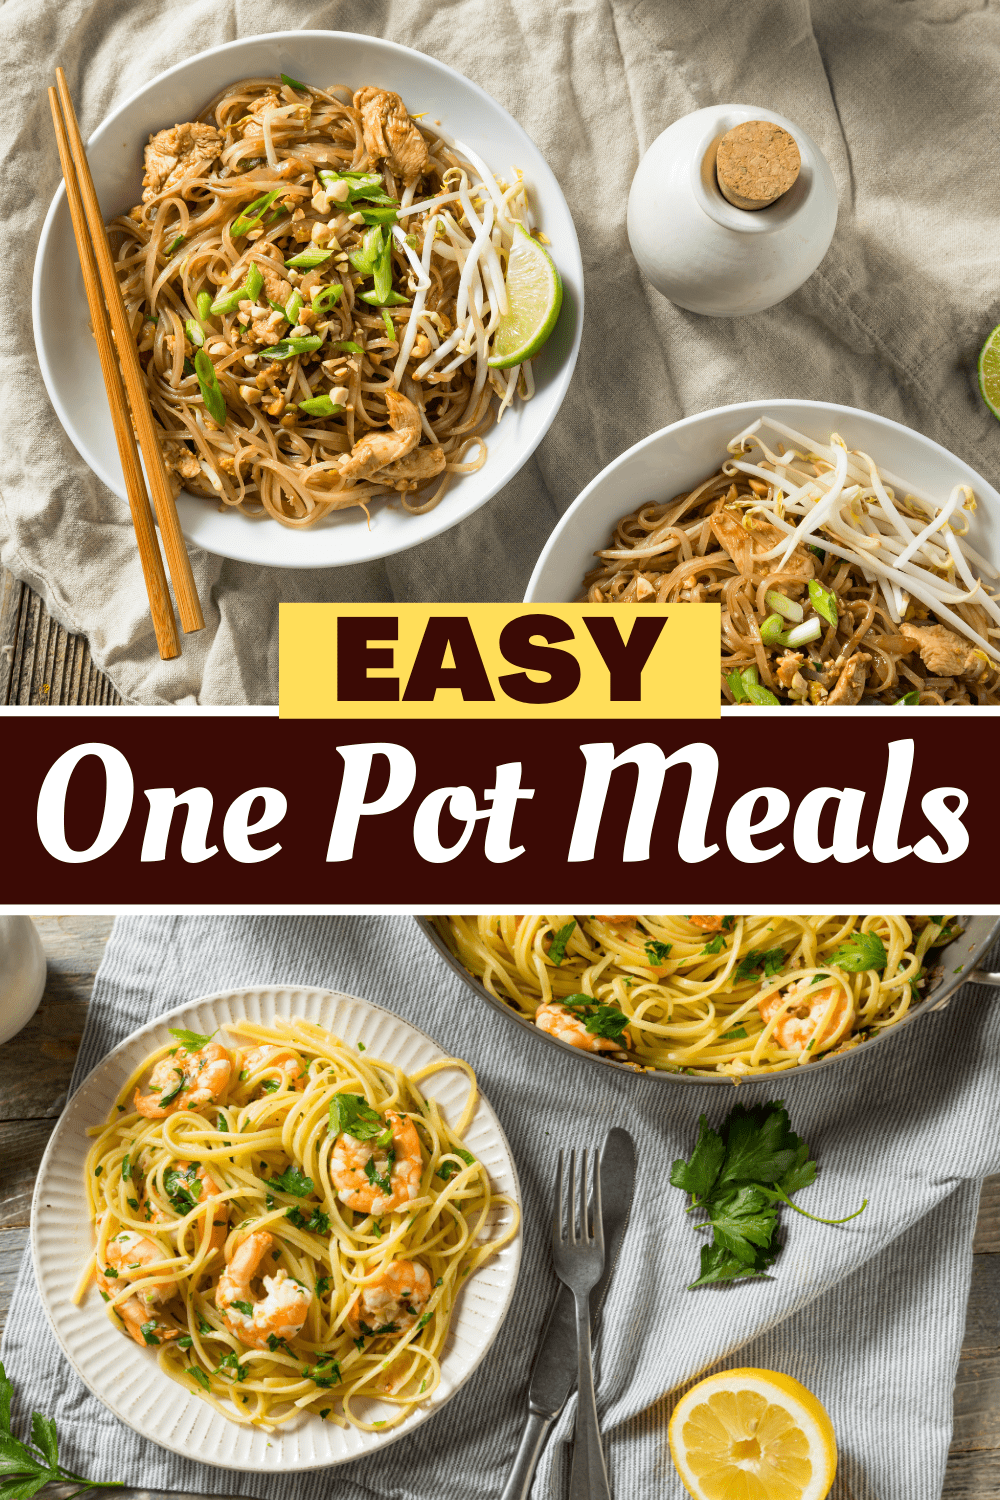 Easy One Pot Meals 2 